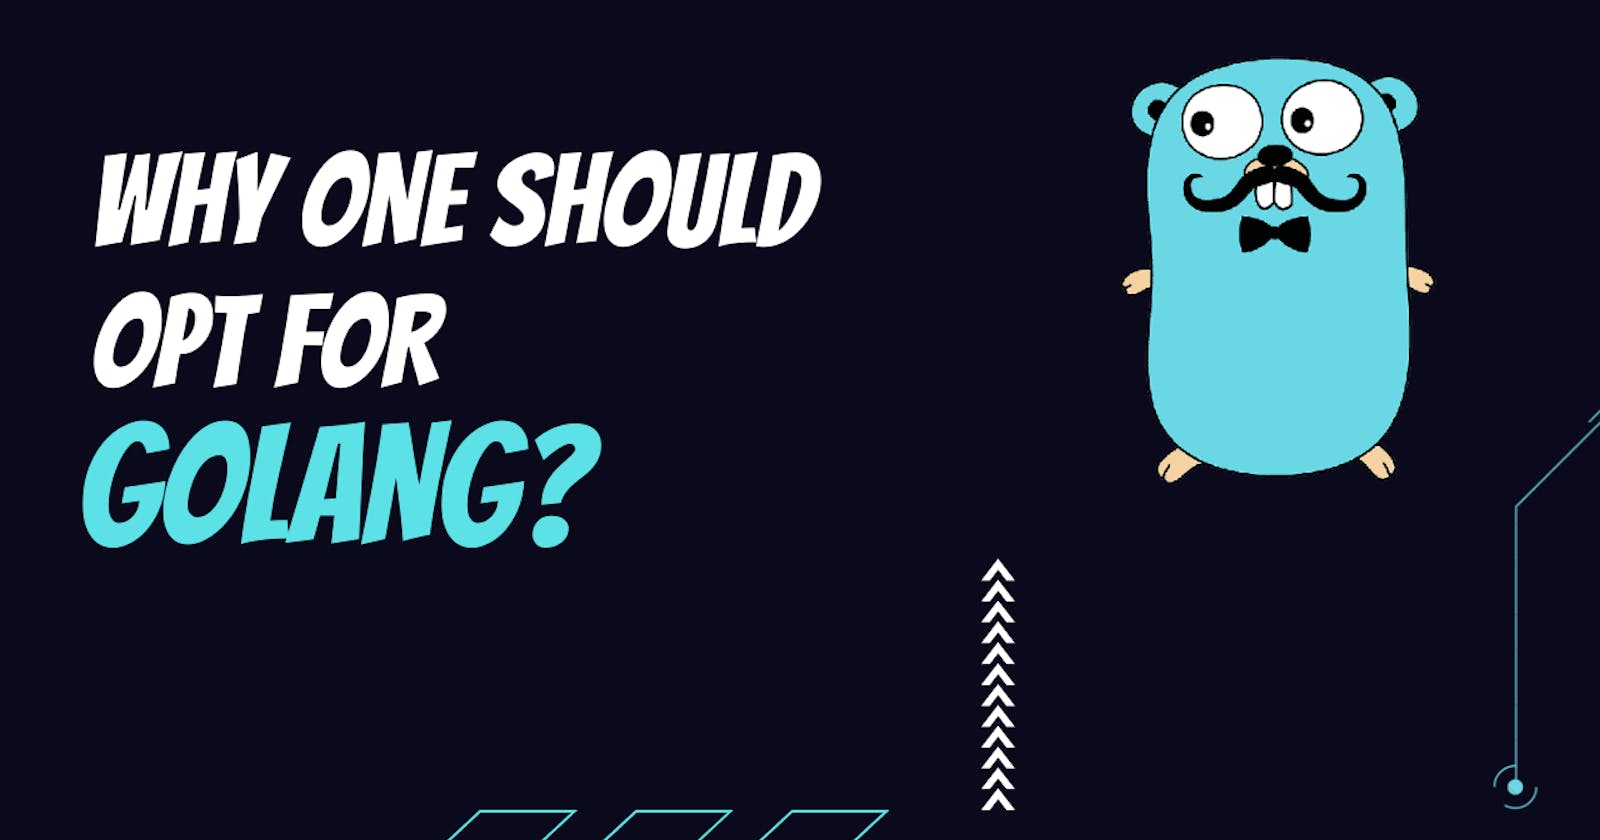 Why Should One Opt For Golang?